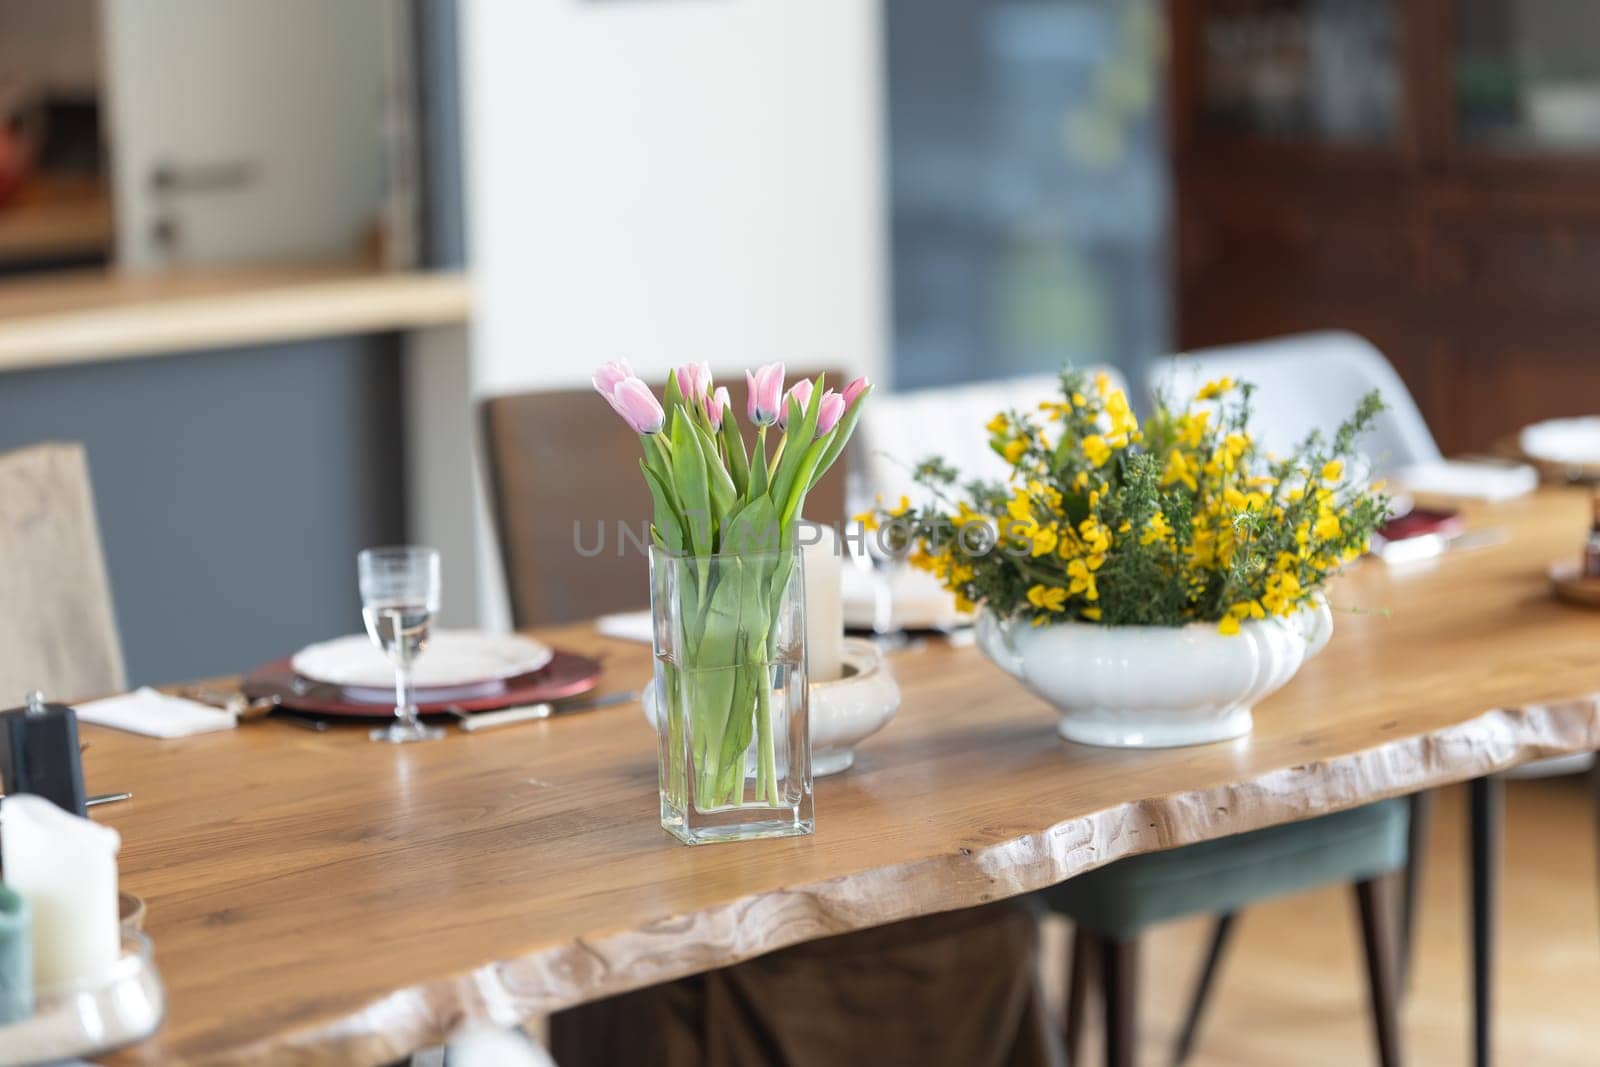 a vase with flowers on the dining table is a festive setting - telephoto